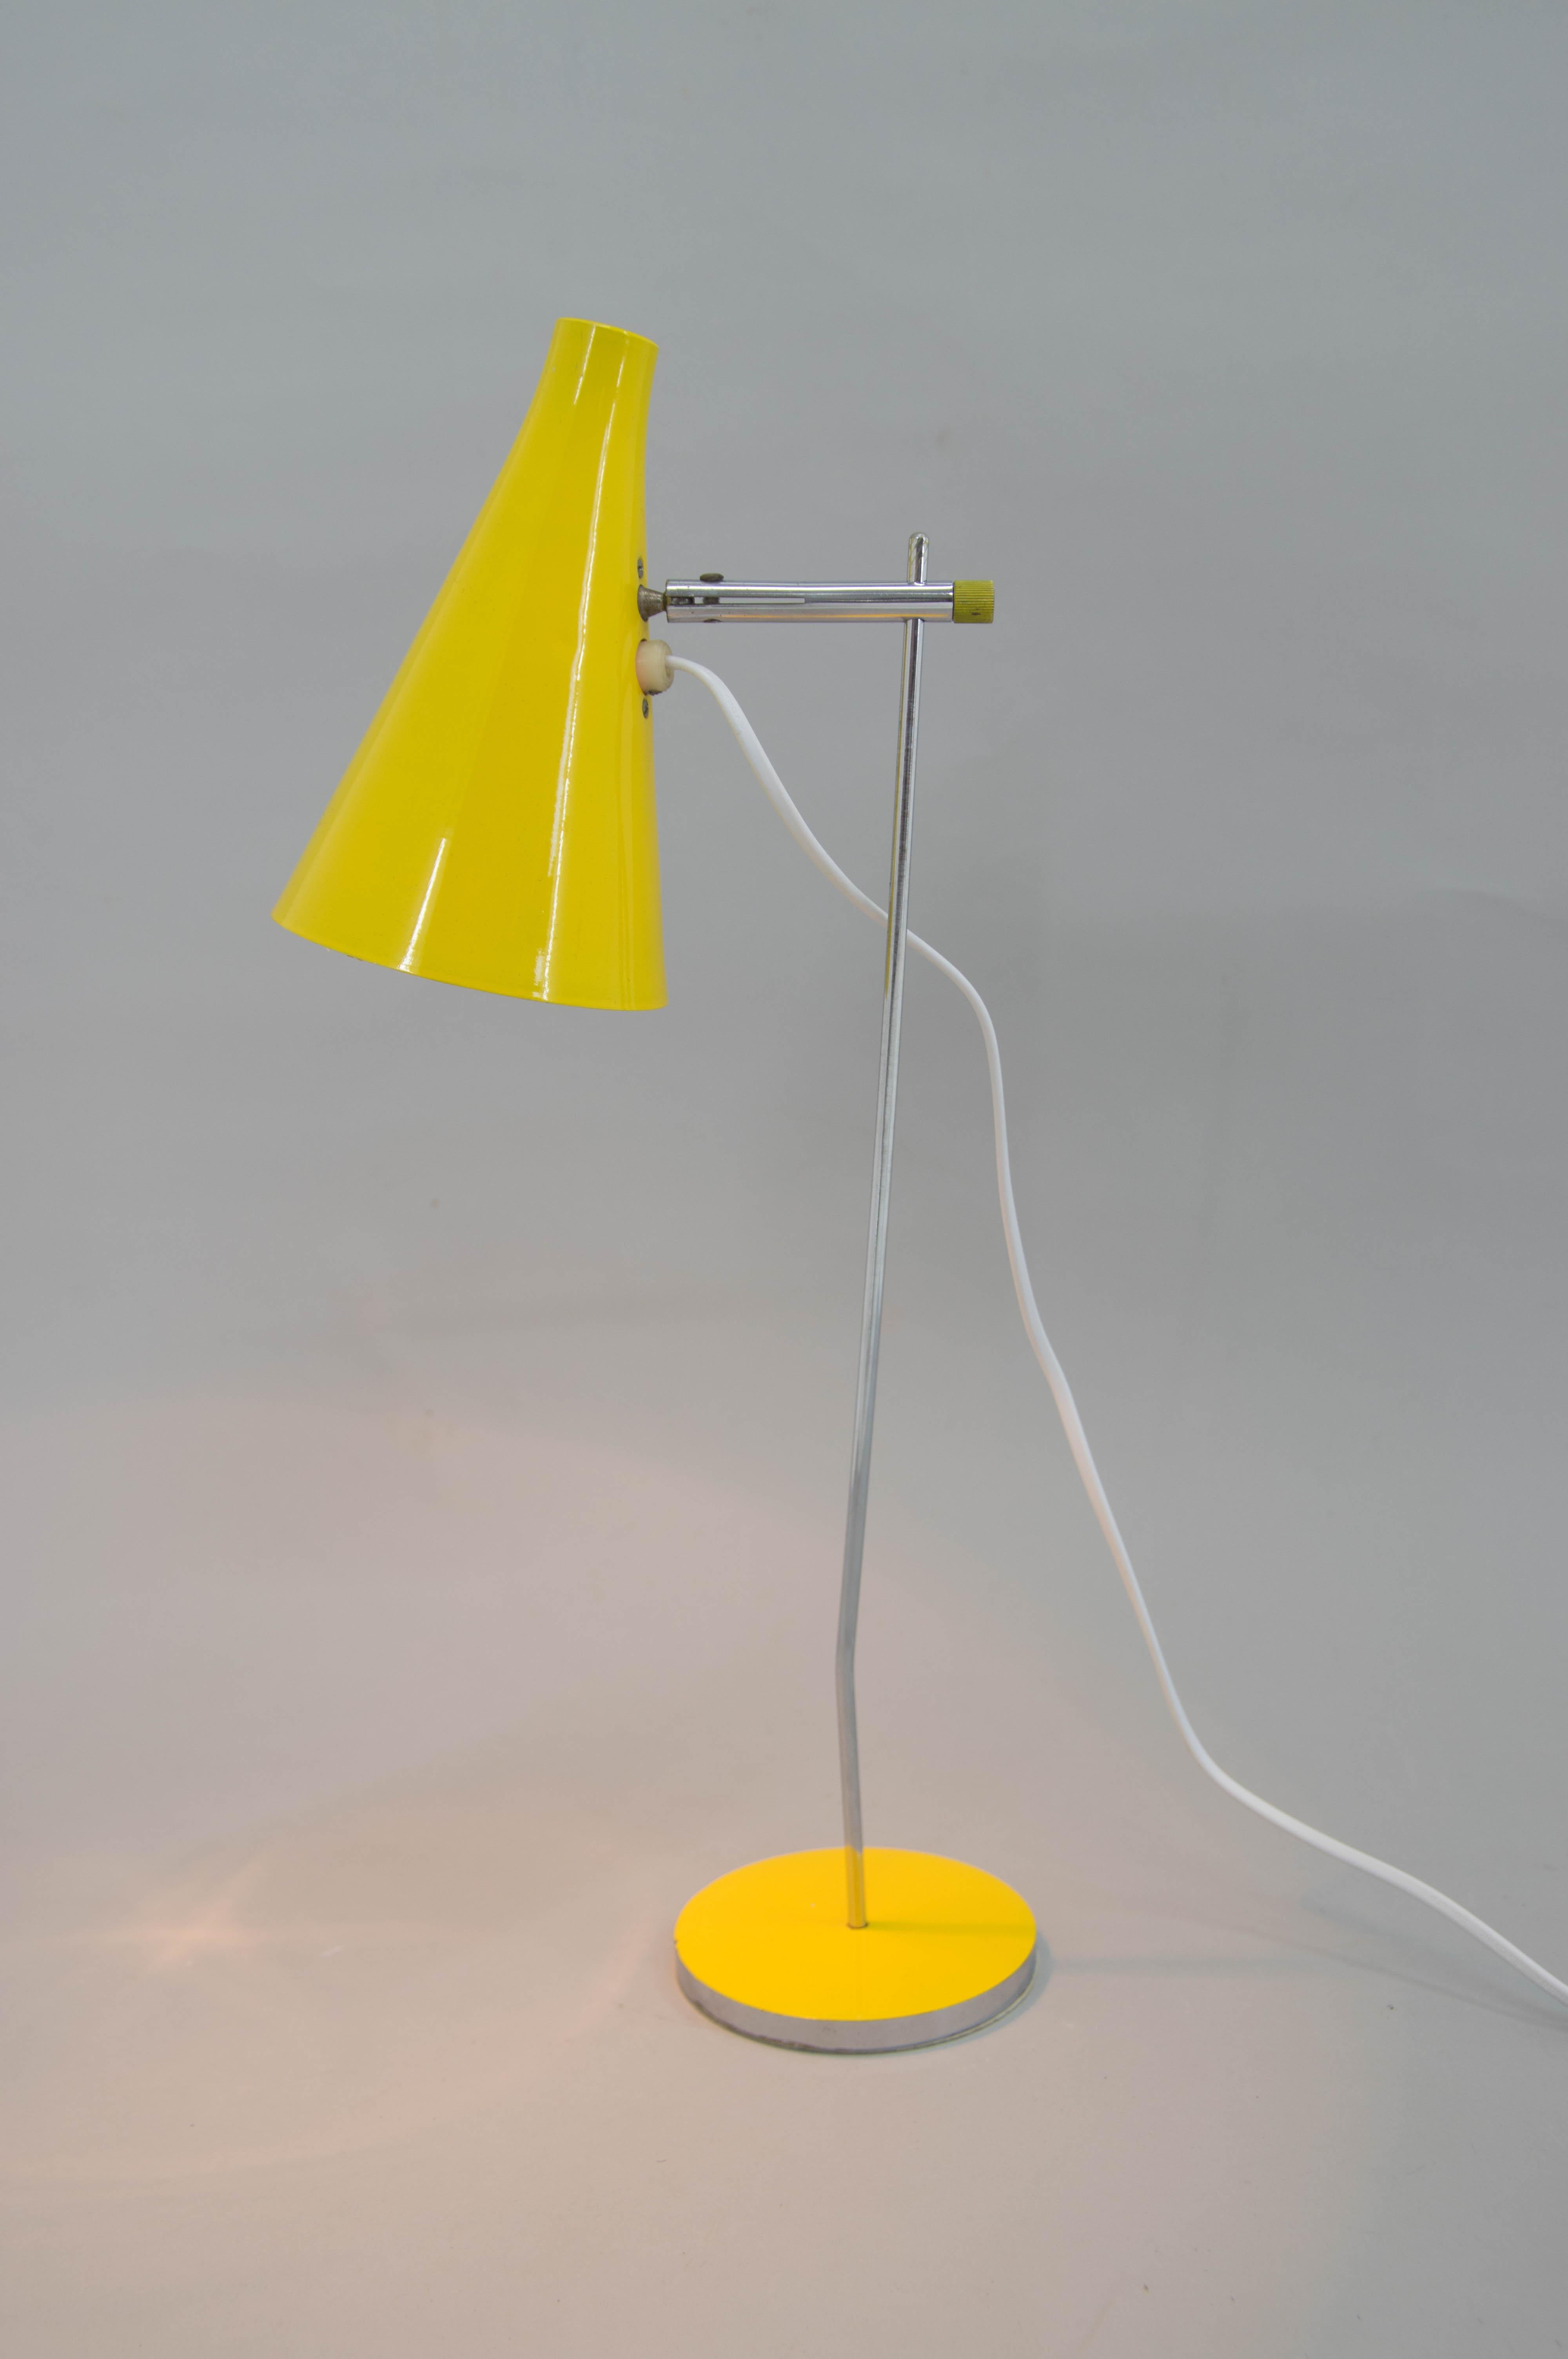 Vintage table lamp designed by Josef Hurka for Napako in former Czechoslovakia in the 1960's.
Rewired: 1x25W, E12-E14
US plug adapter included